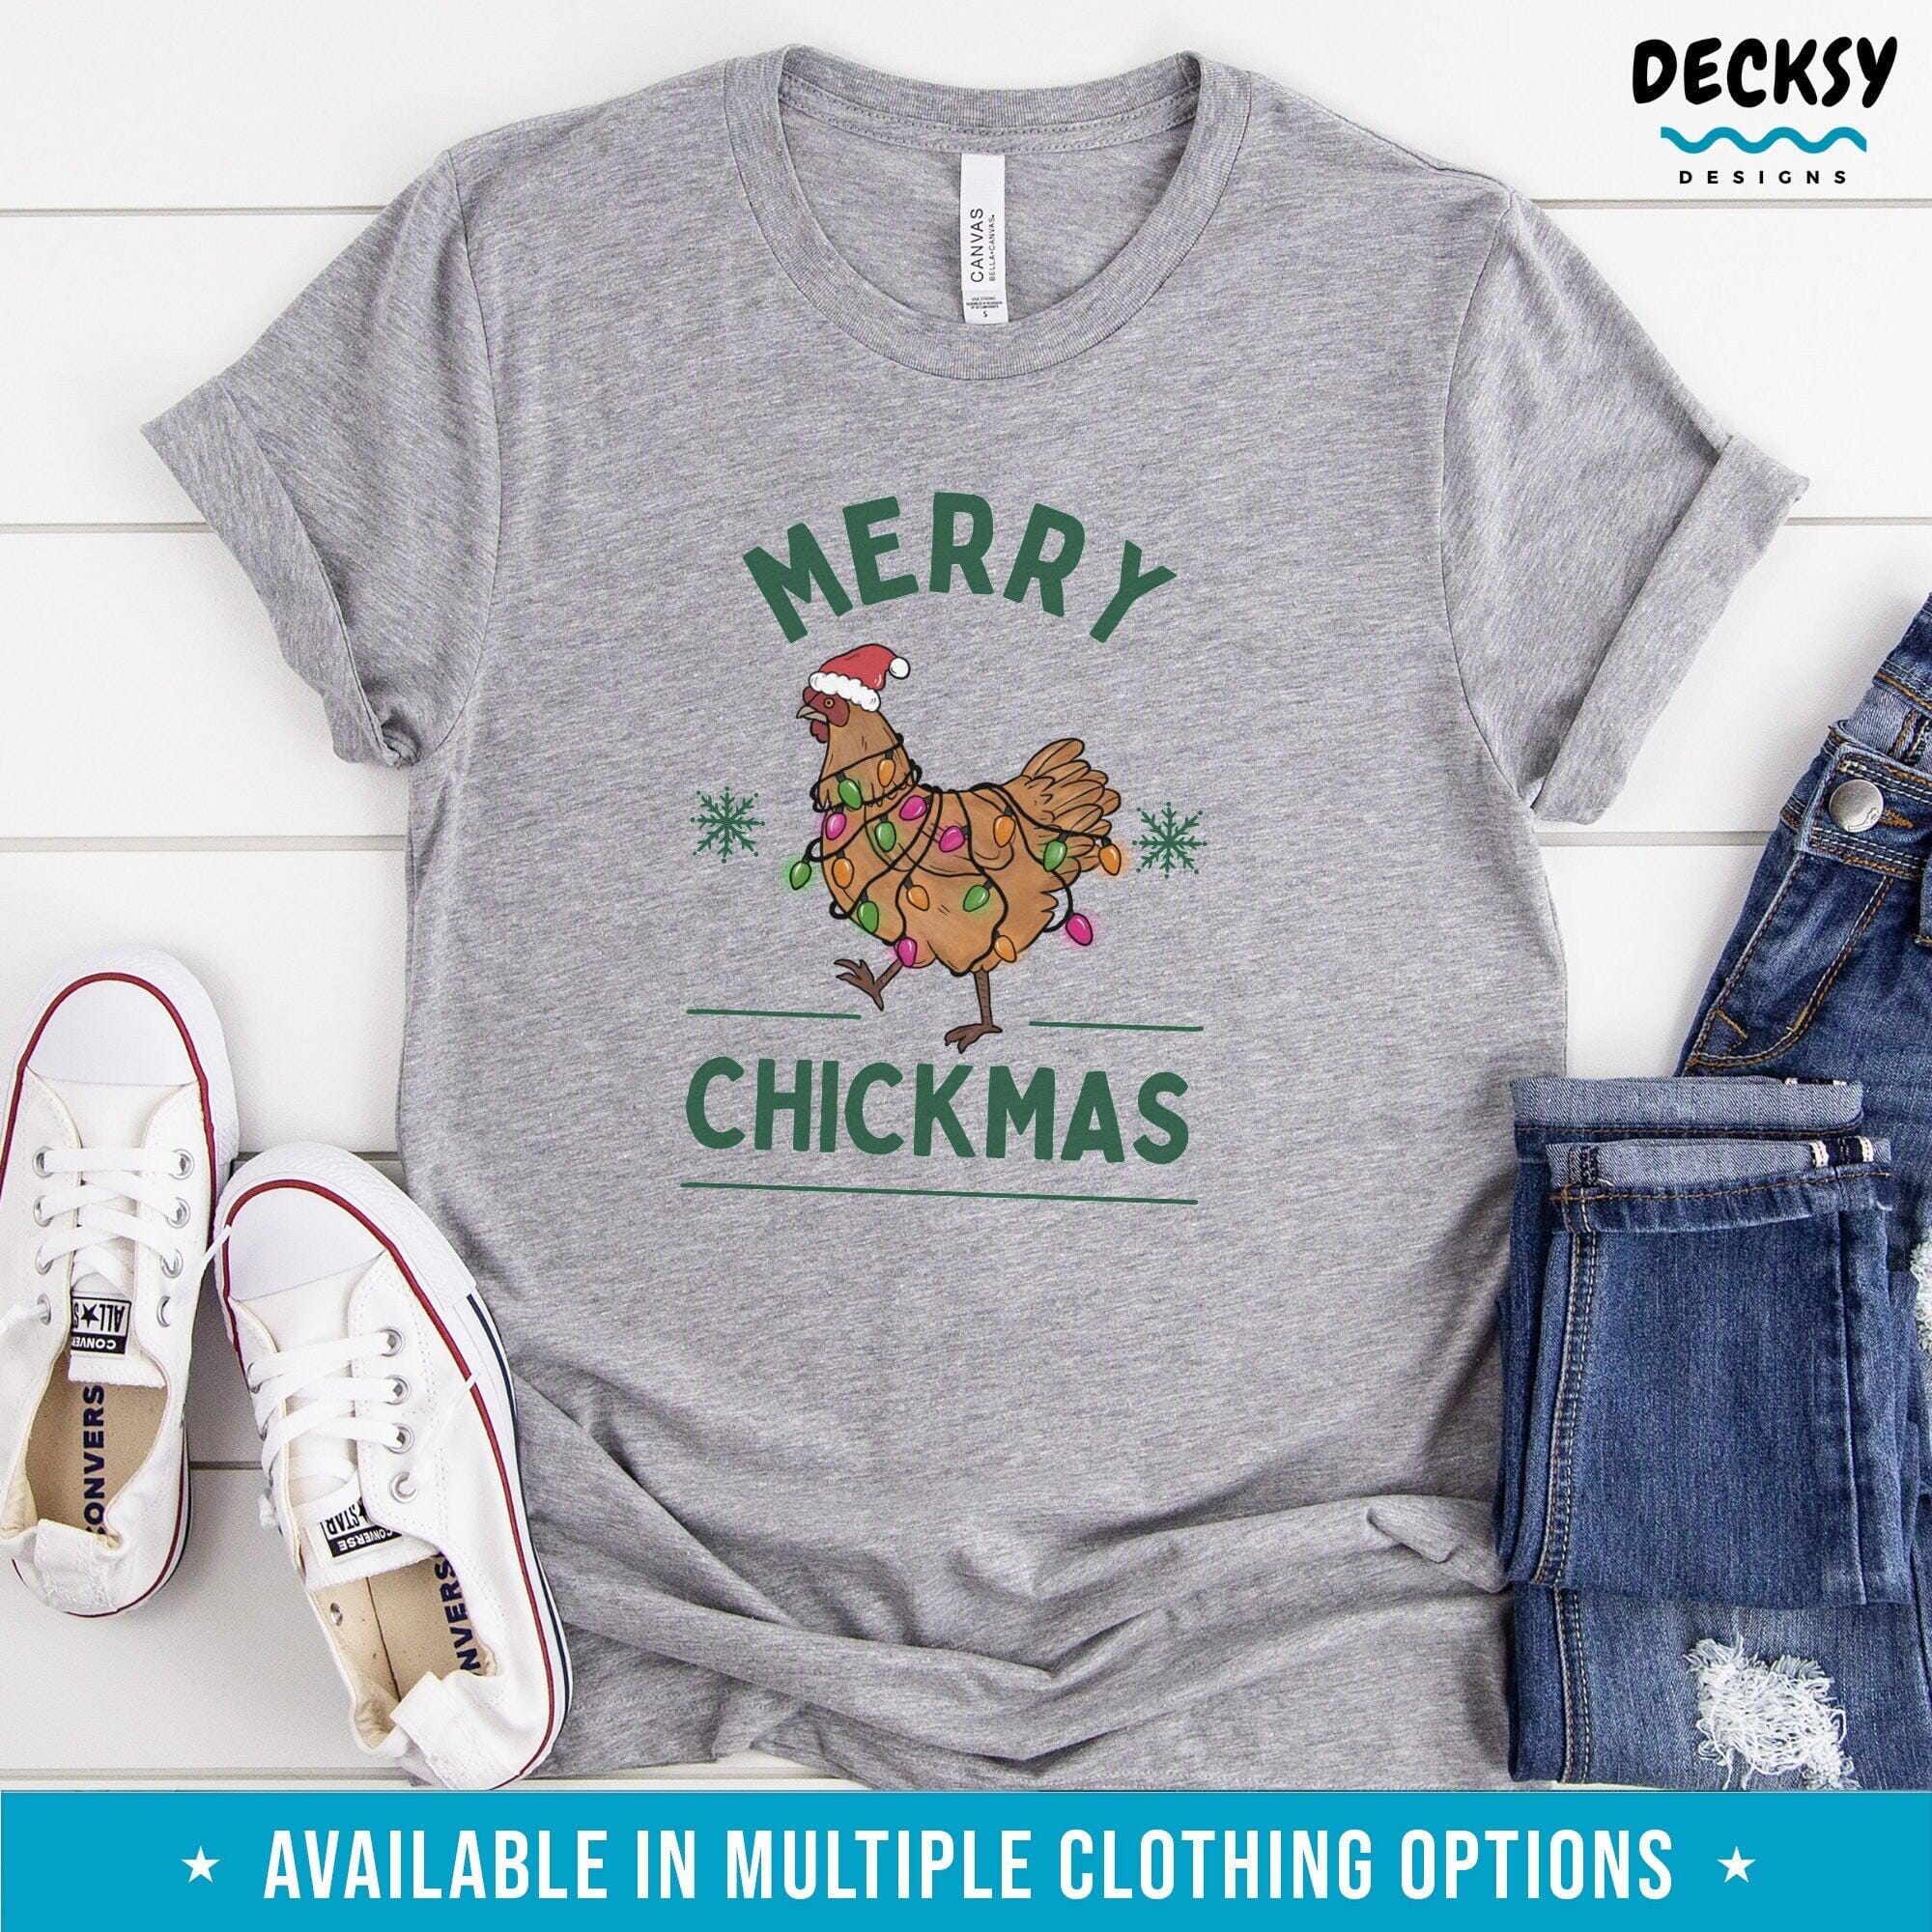 Christmas Shirt, Chicken Christmas Gift-Clothing:Gender-Neutral Adult Clothing:Tops & Tees:T-shirts:Graphic Tees-DecksyDesigns